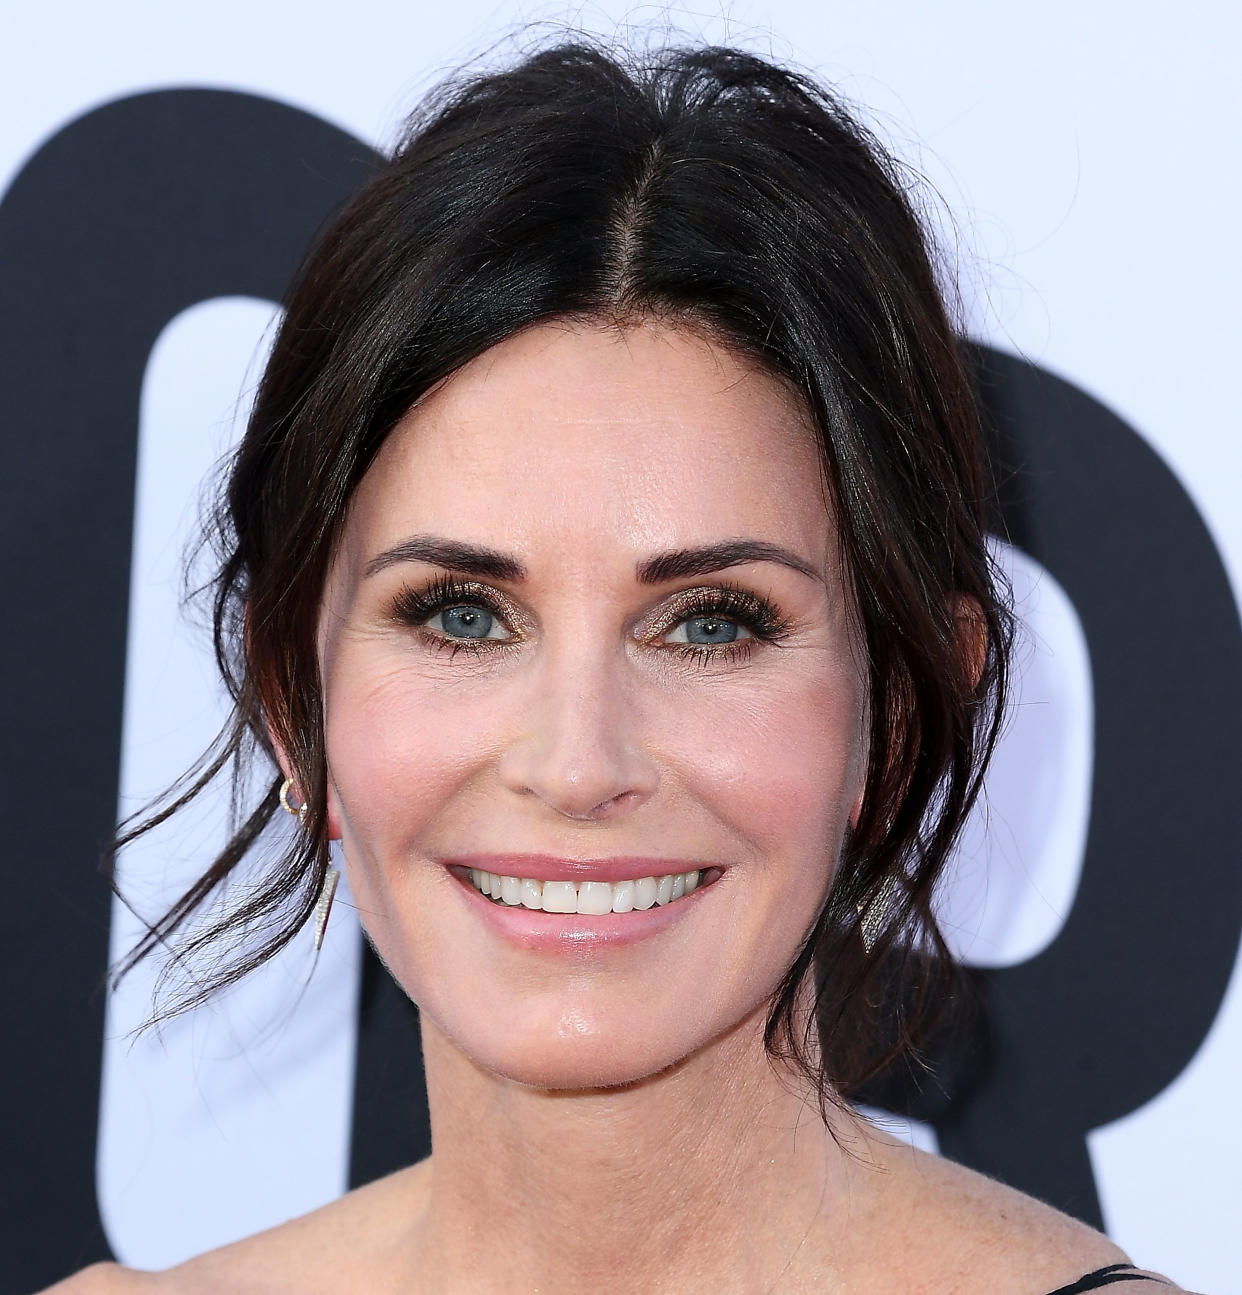 Actress Courteney Cox, 57, speaks out about aging. (Photo: Steve Granitz/WireImage)